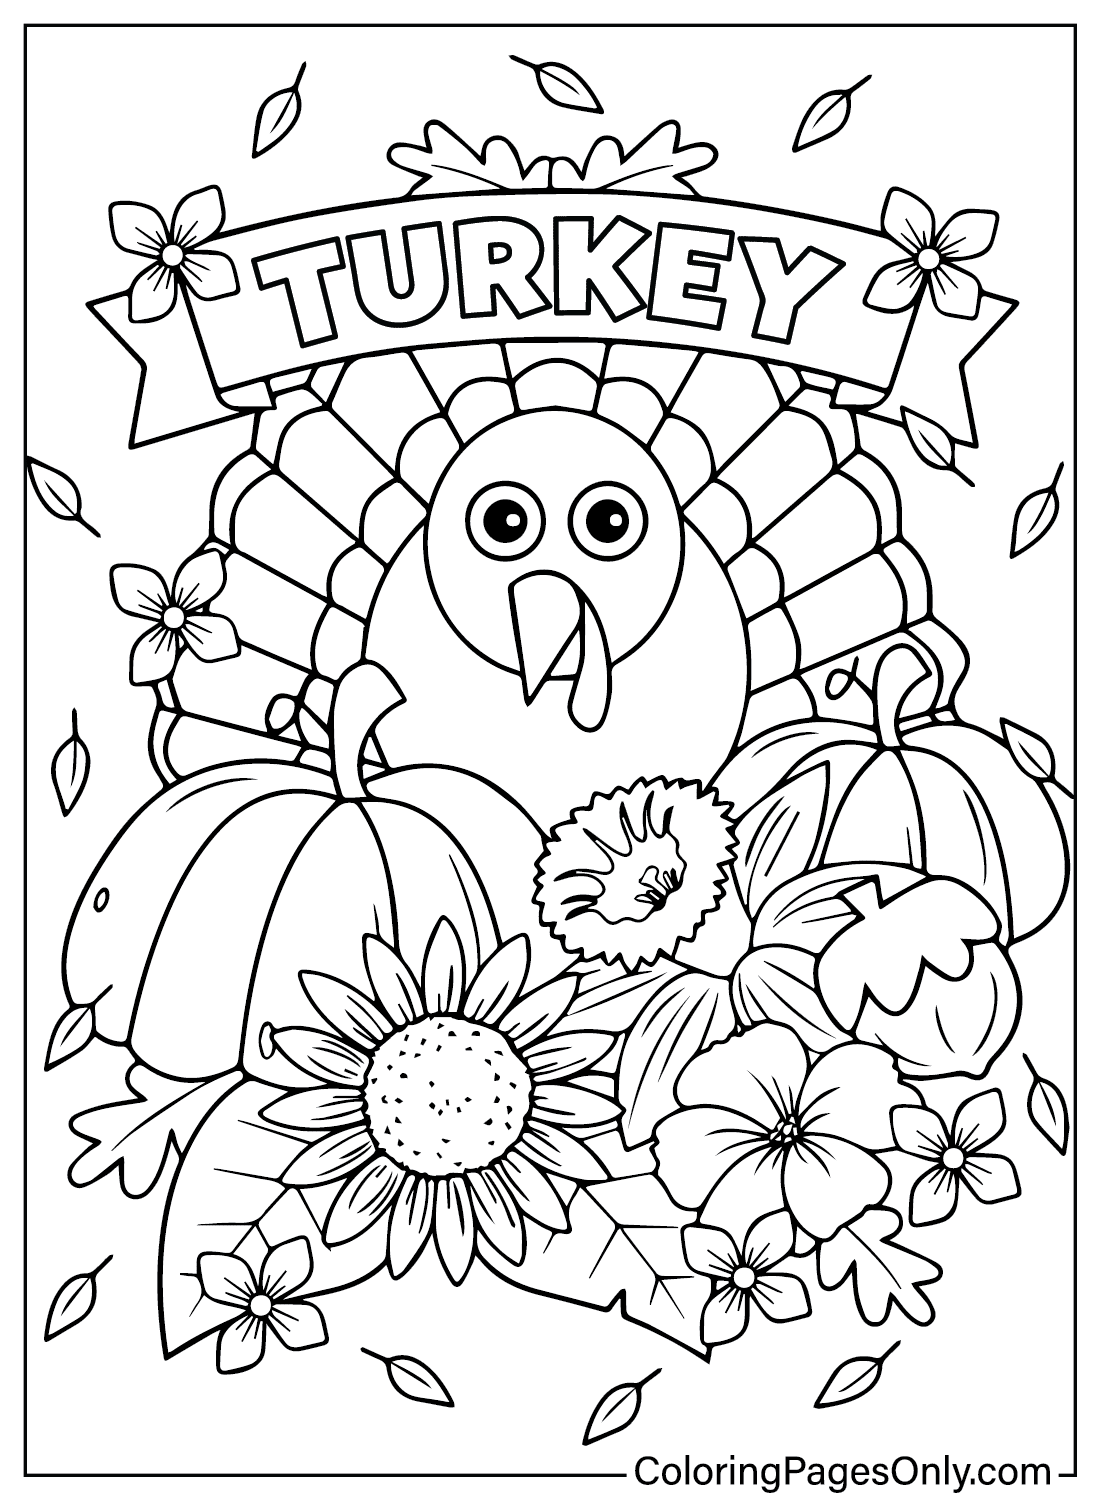 Turkey Coloring Page from Turkey